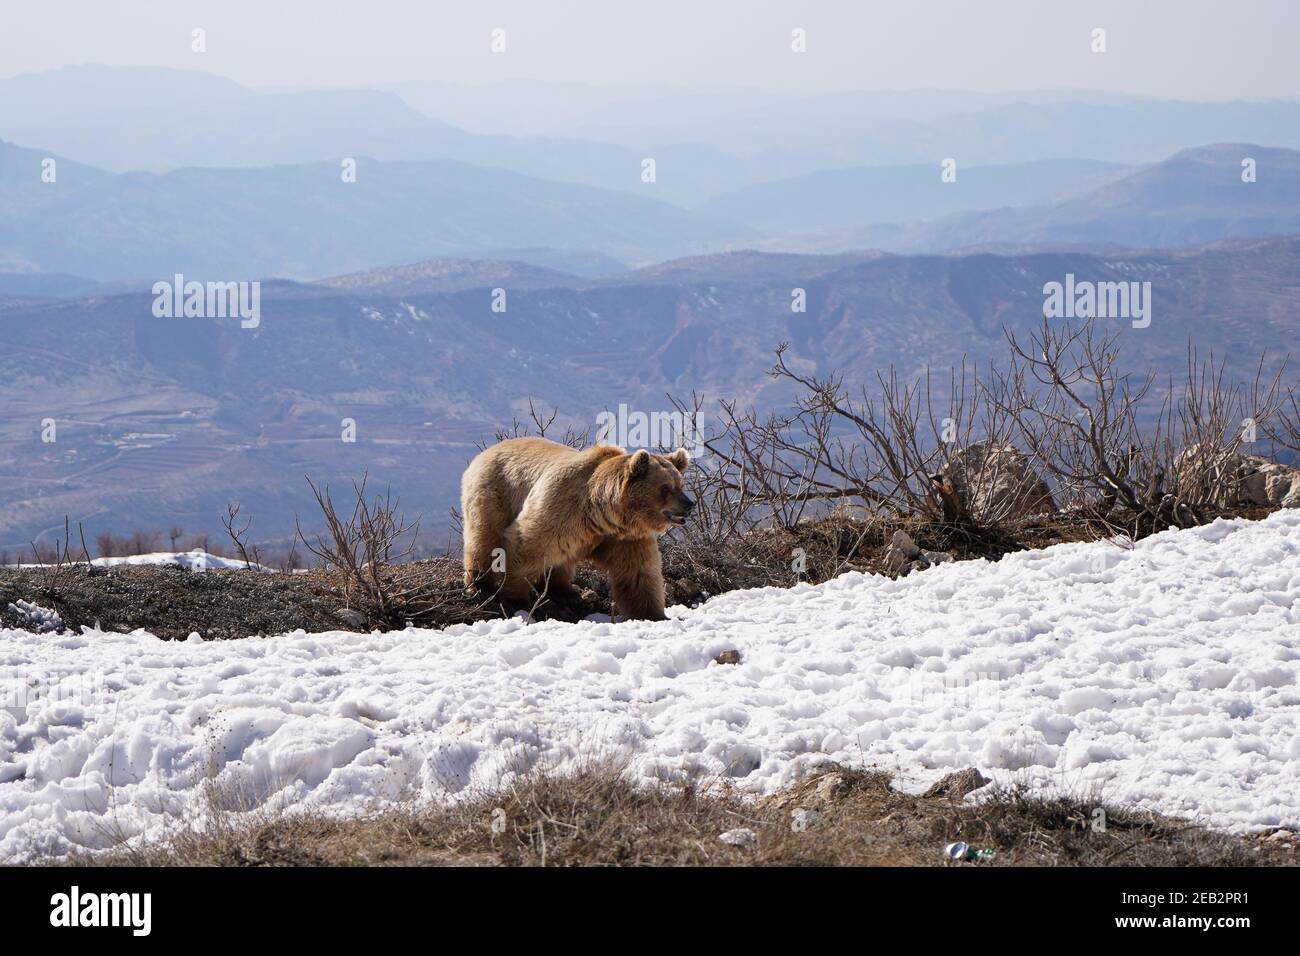 røre ved Fejl Ledig Duhok, Iraq. 11th Feb, 2021. A bear walks on a snowy ground after leaving  the cage.The release of six bears in Gara mountain in Duhok governorate in  the Kurdistan region of Iraq,